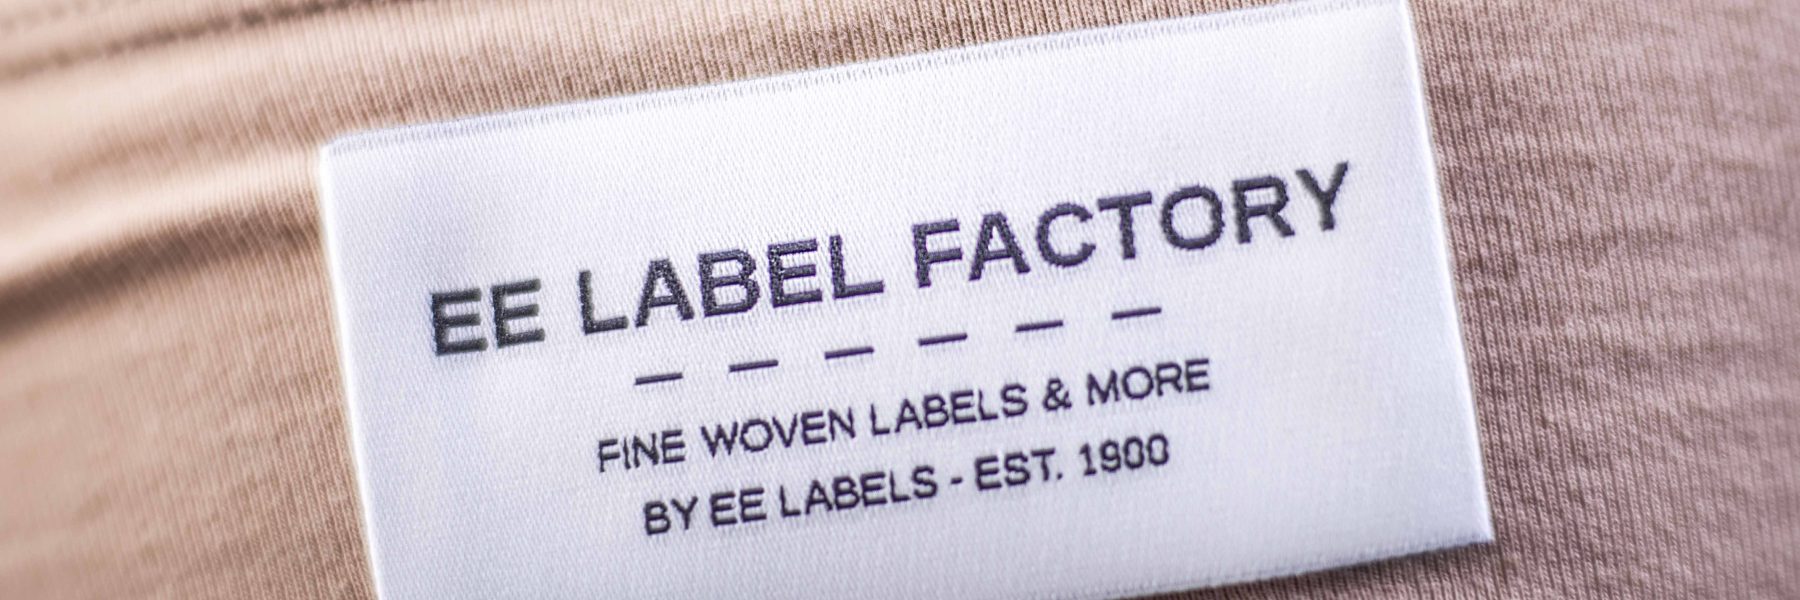 Woven Clothing Labels — The Many Benefits